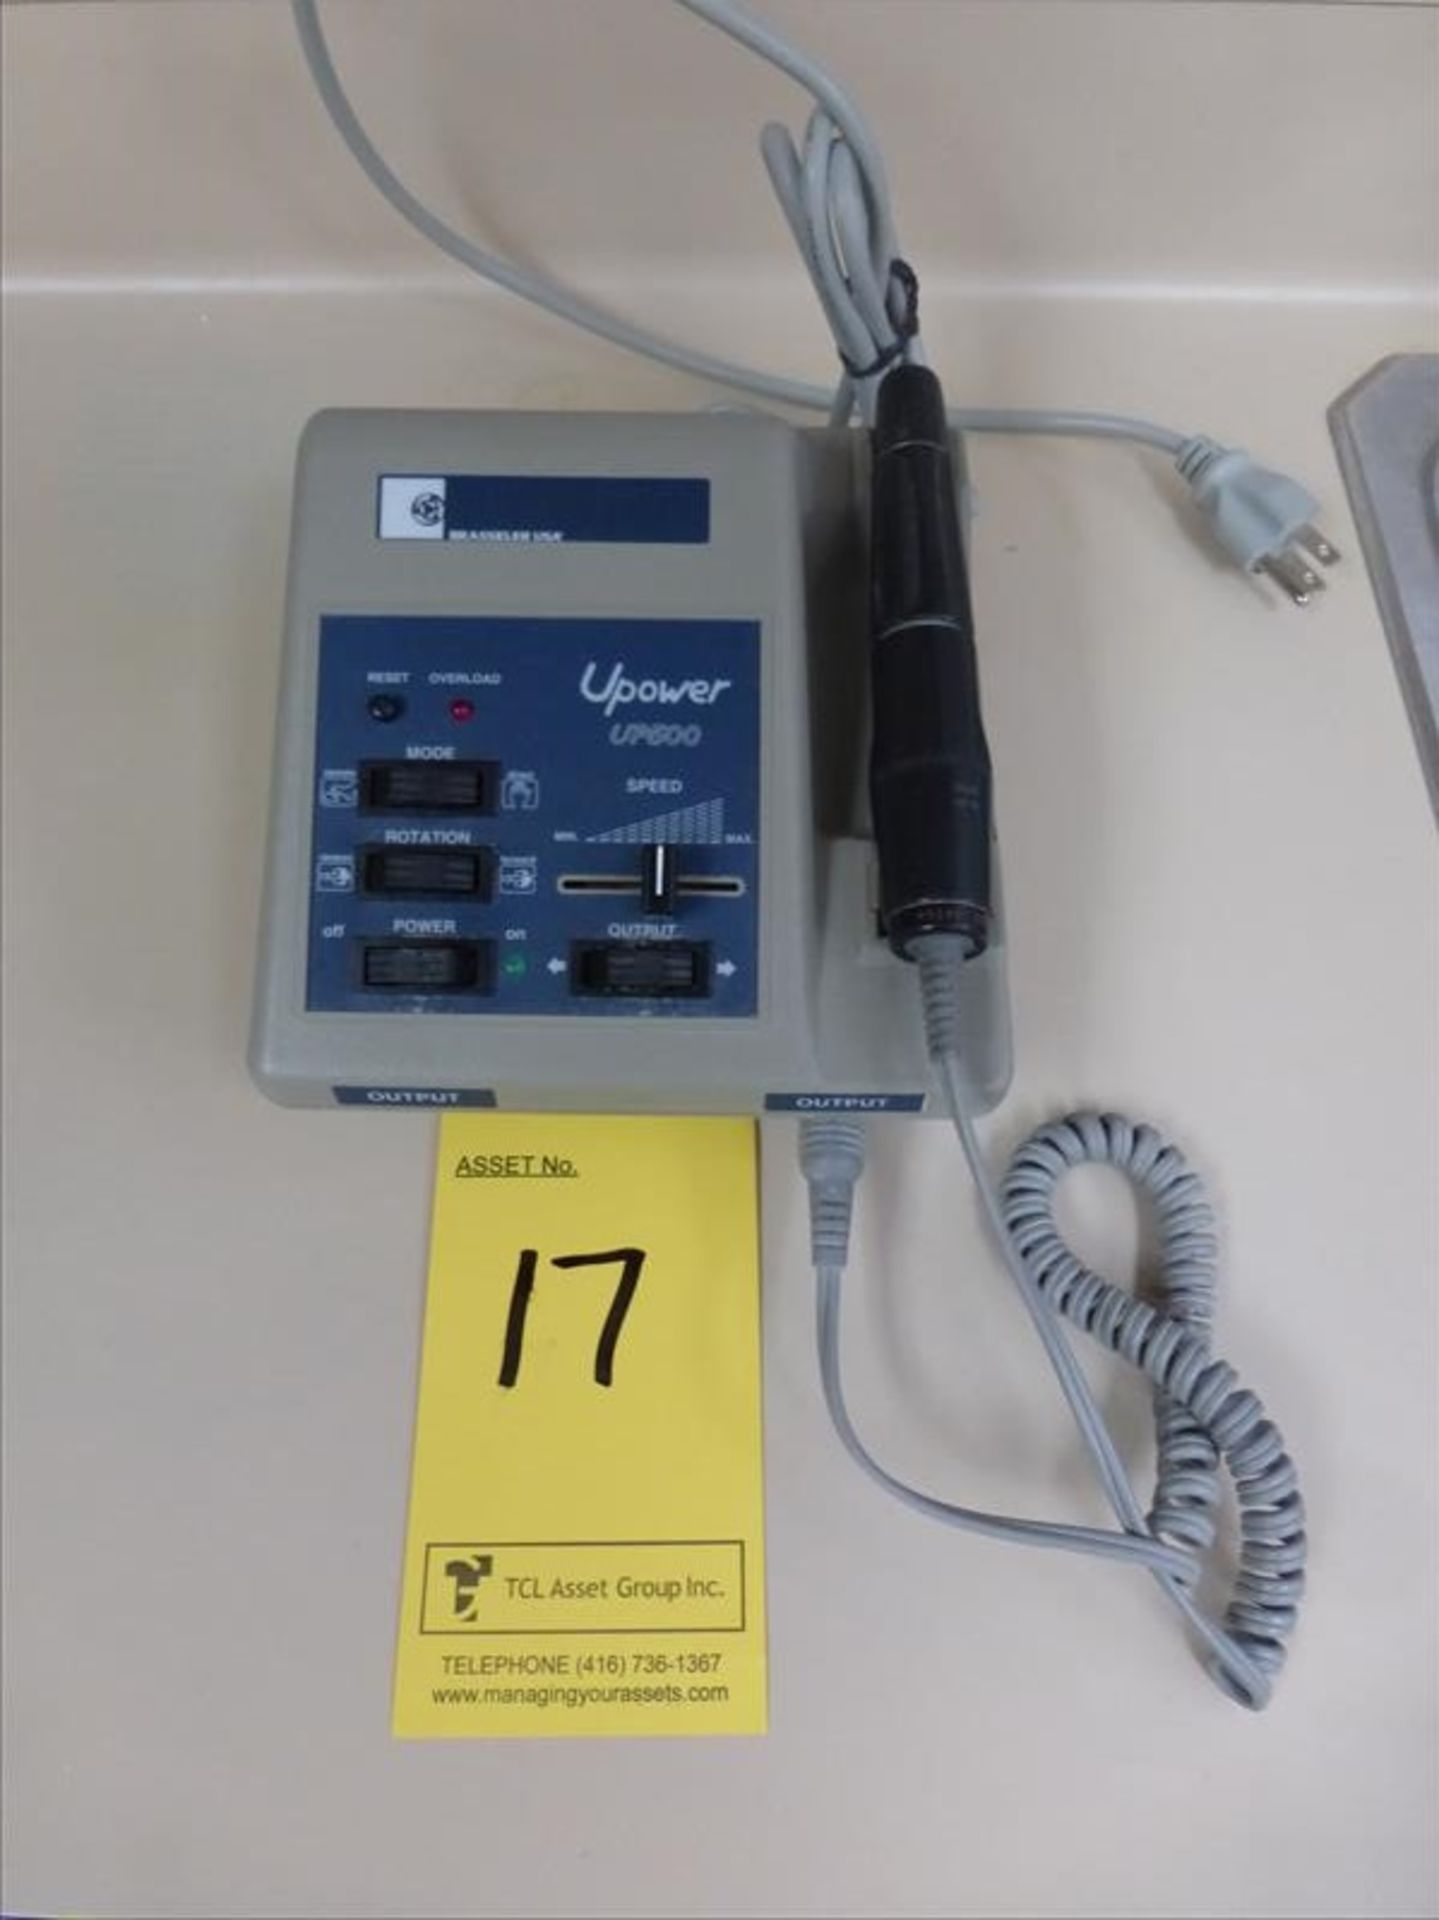 Upower micro motor handpiece, model UP500. [Winner will be determined based on sum of bids on lots